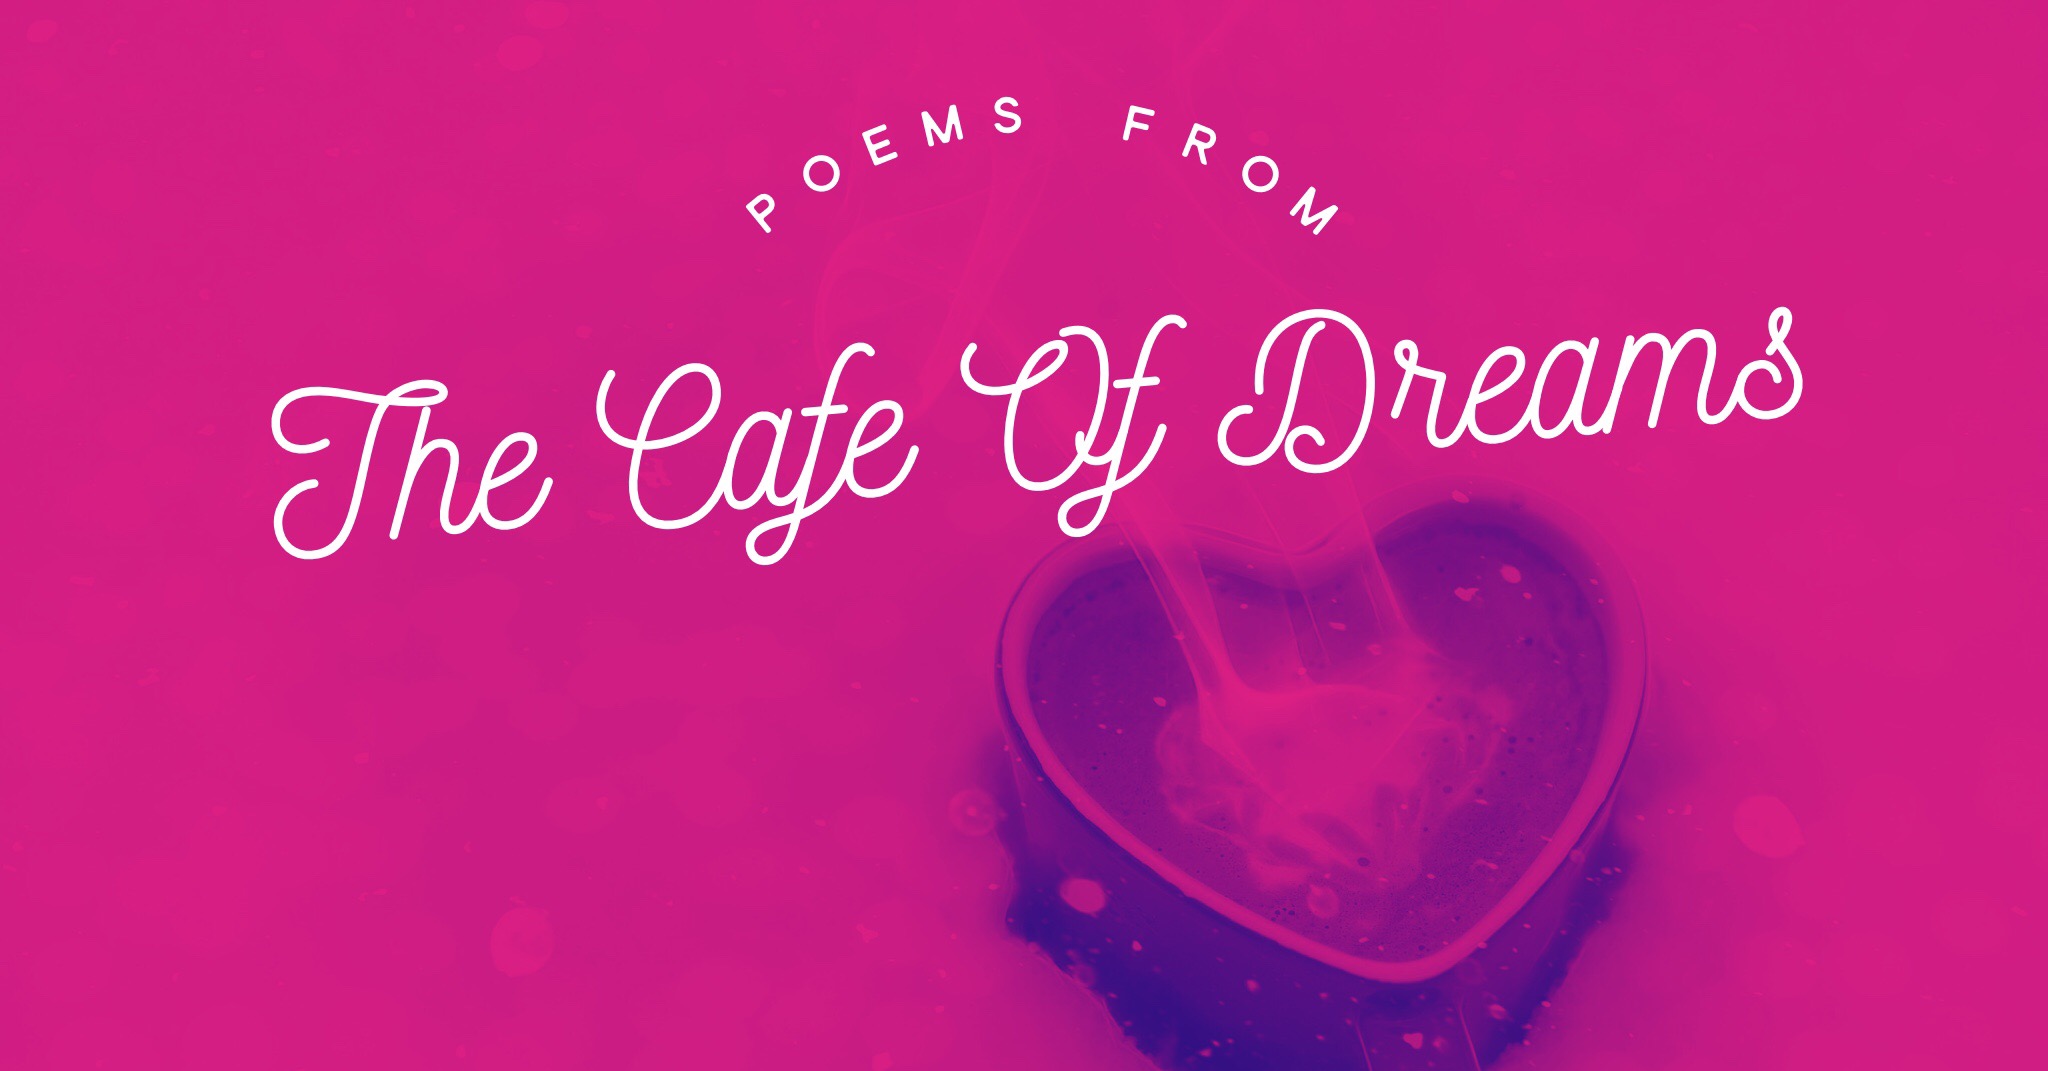 The Cafe of Dreams